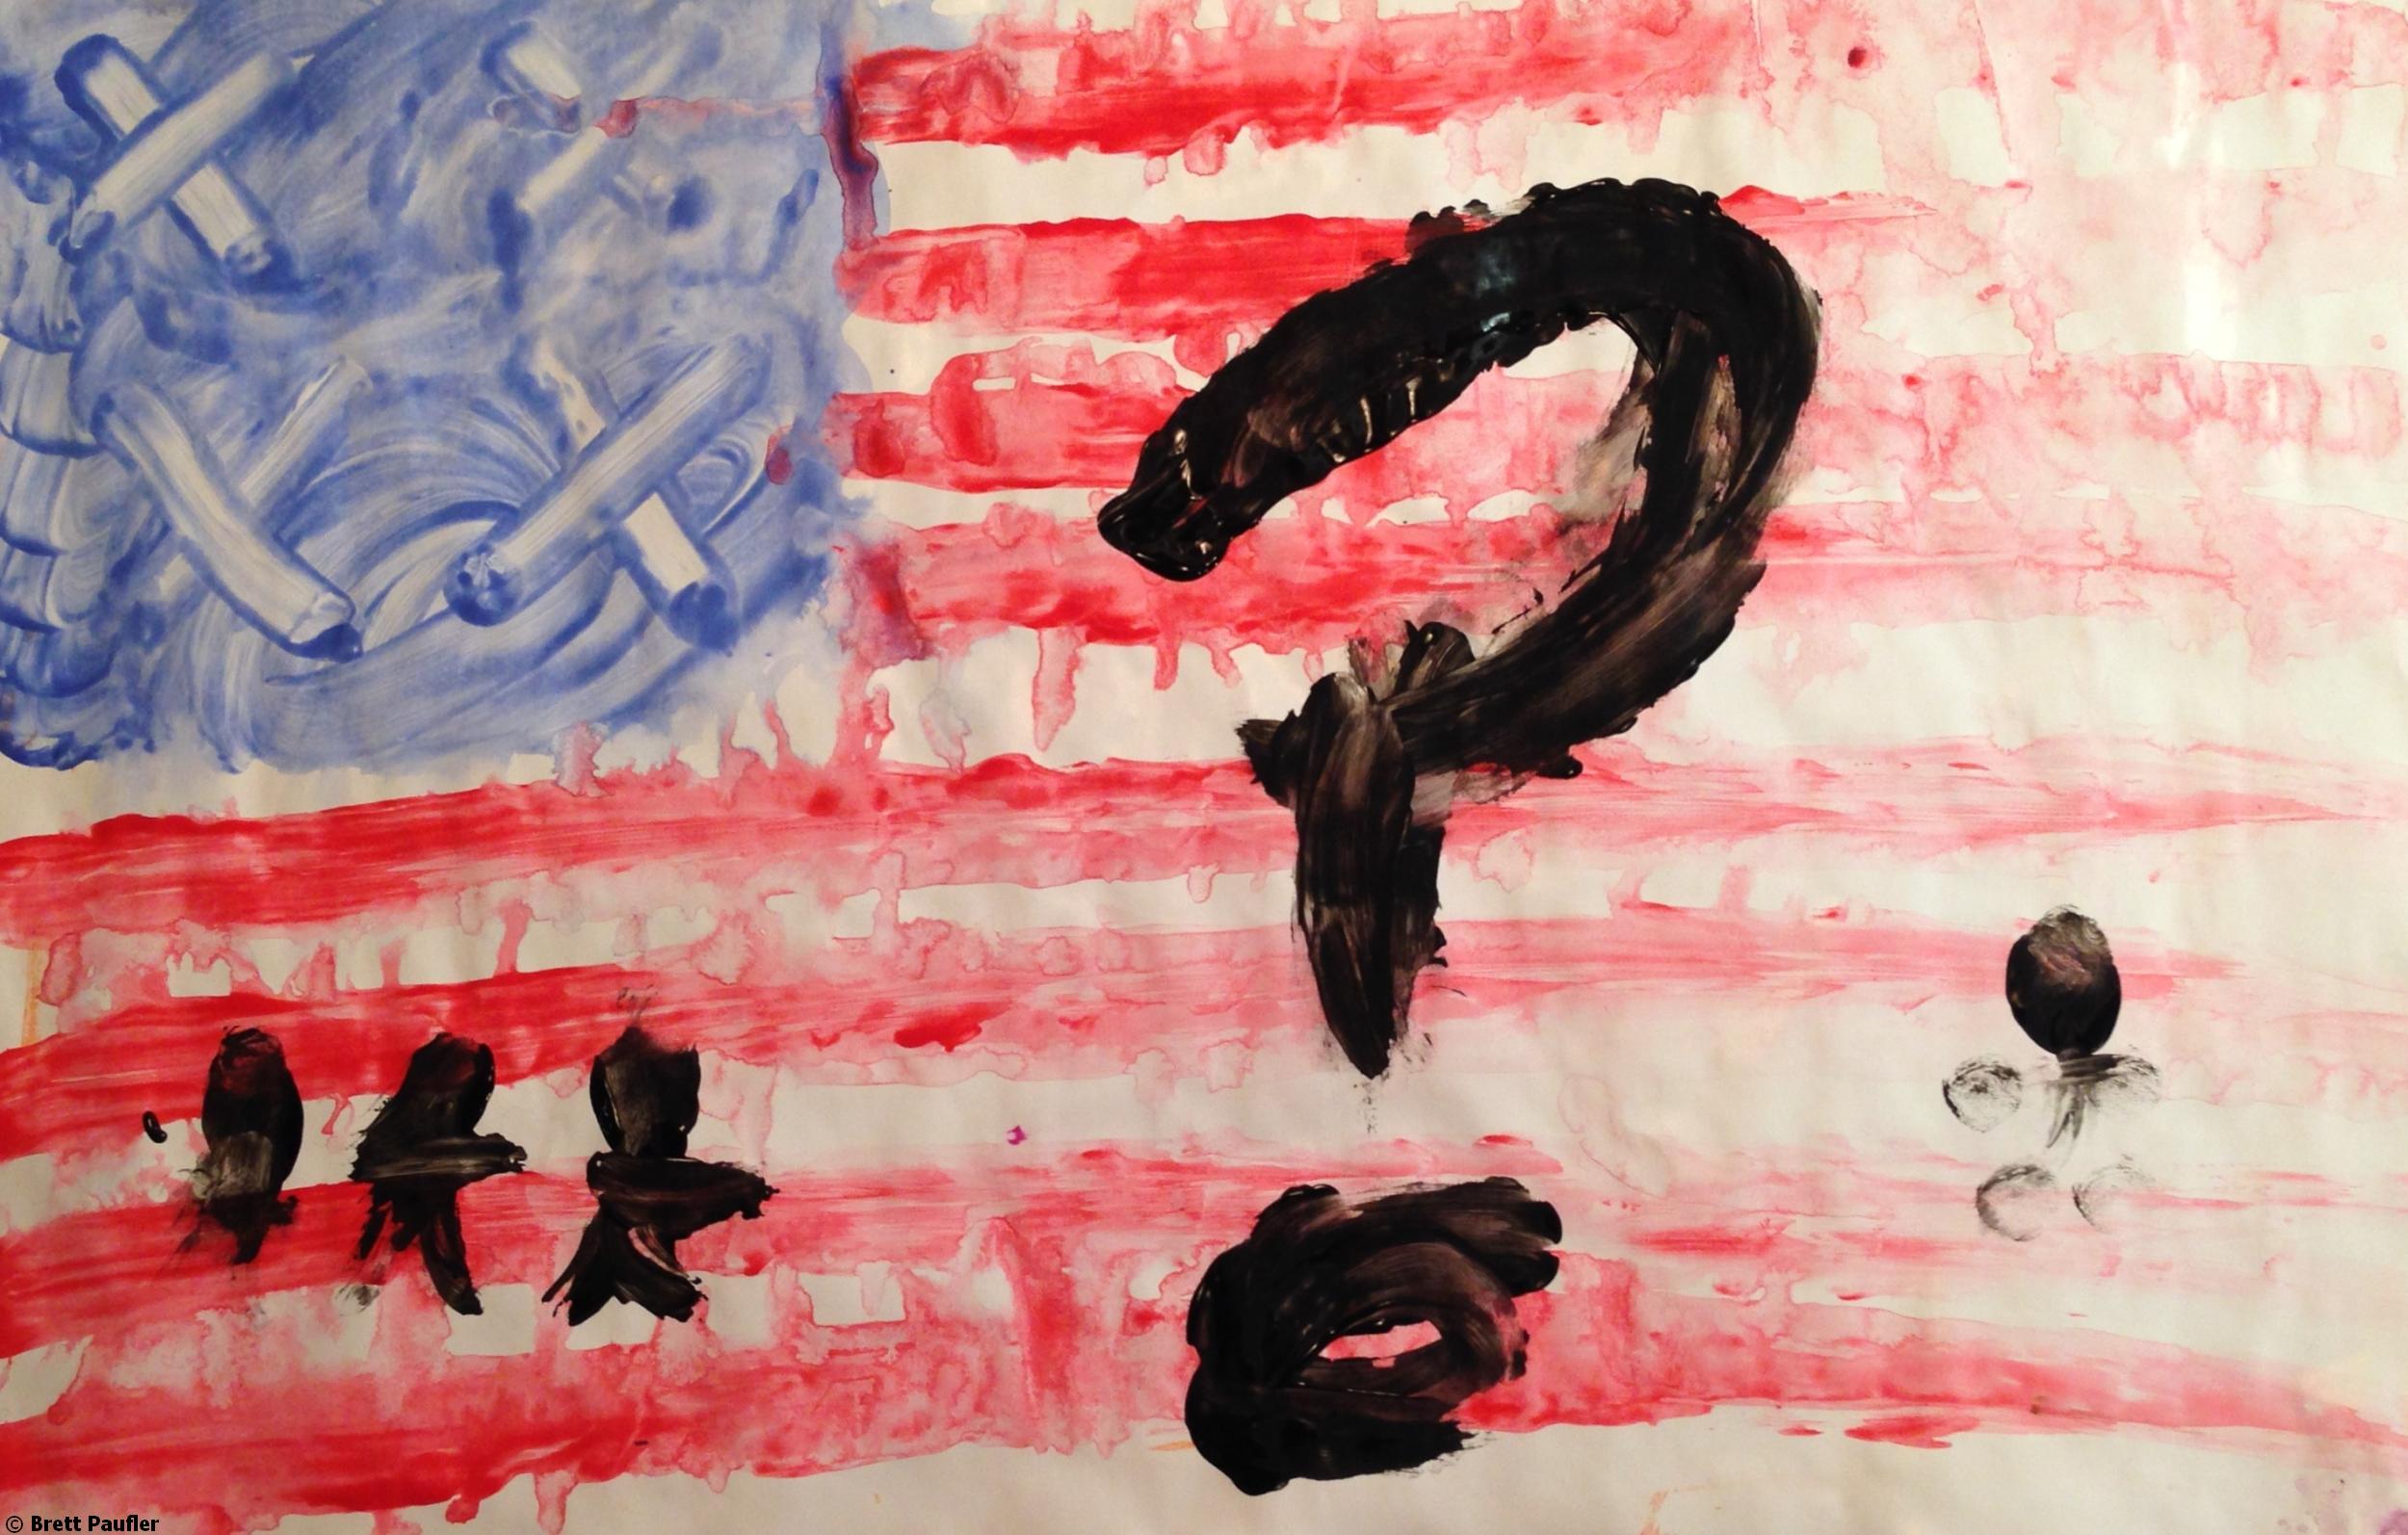 A Stylized Representation of Old Glory with three stick figures, a question mark, and another figure off to the side